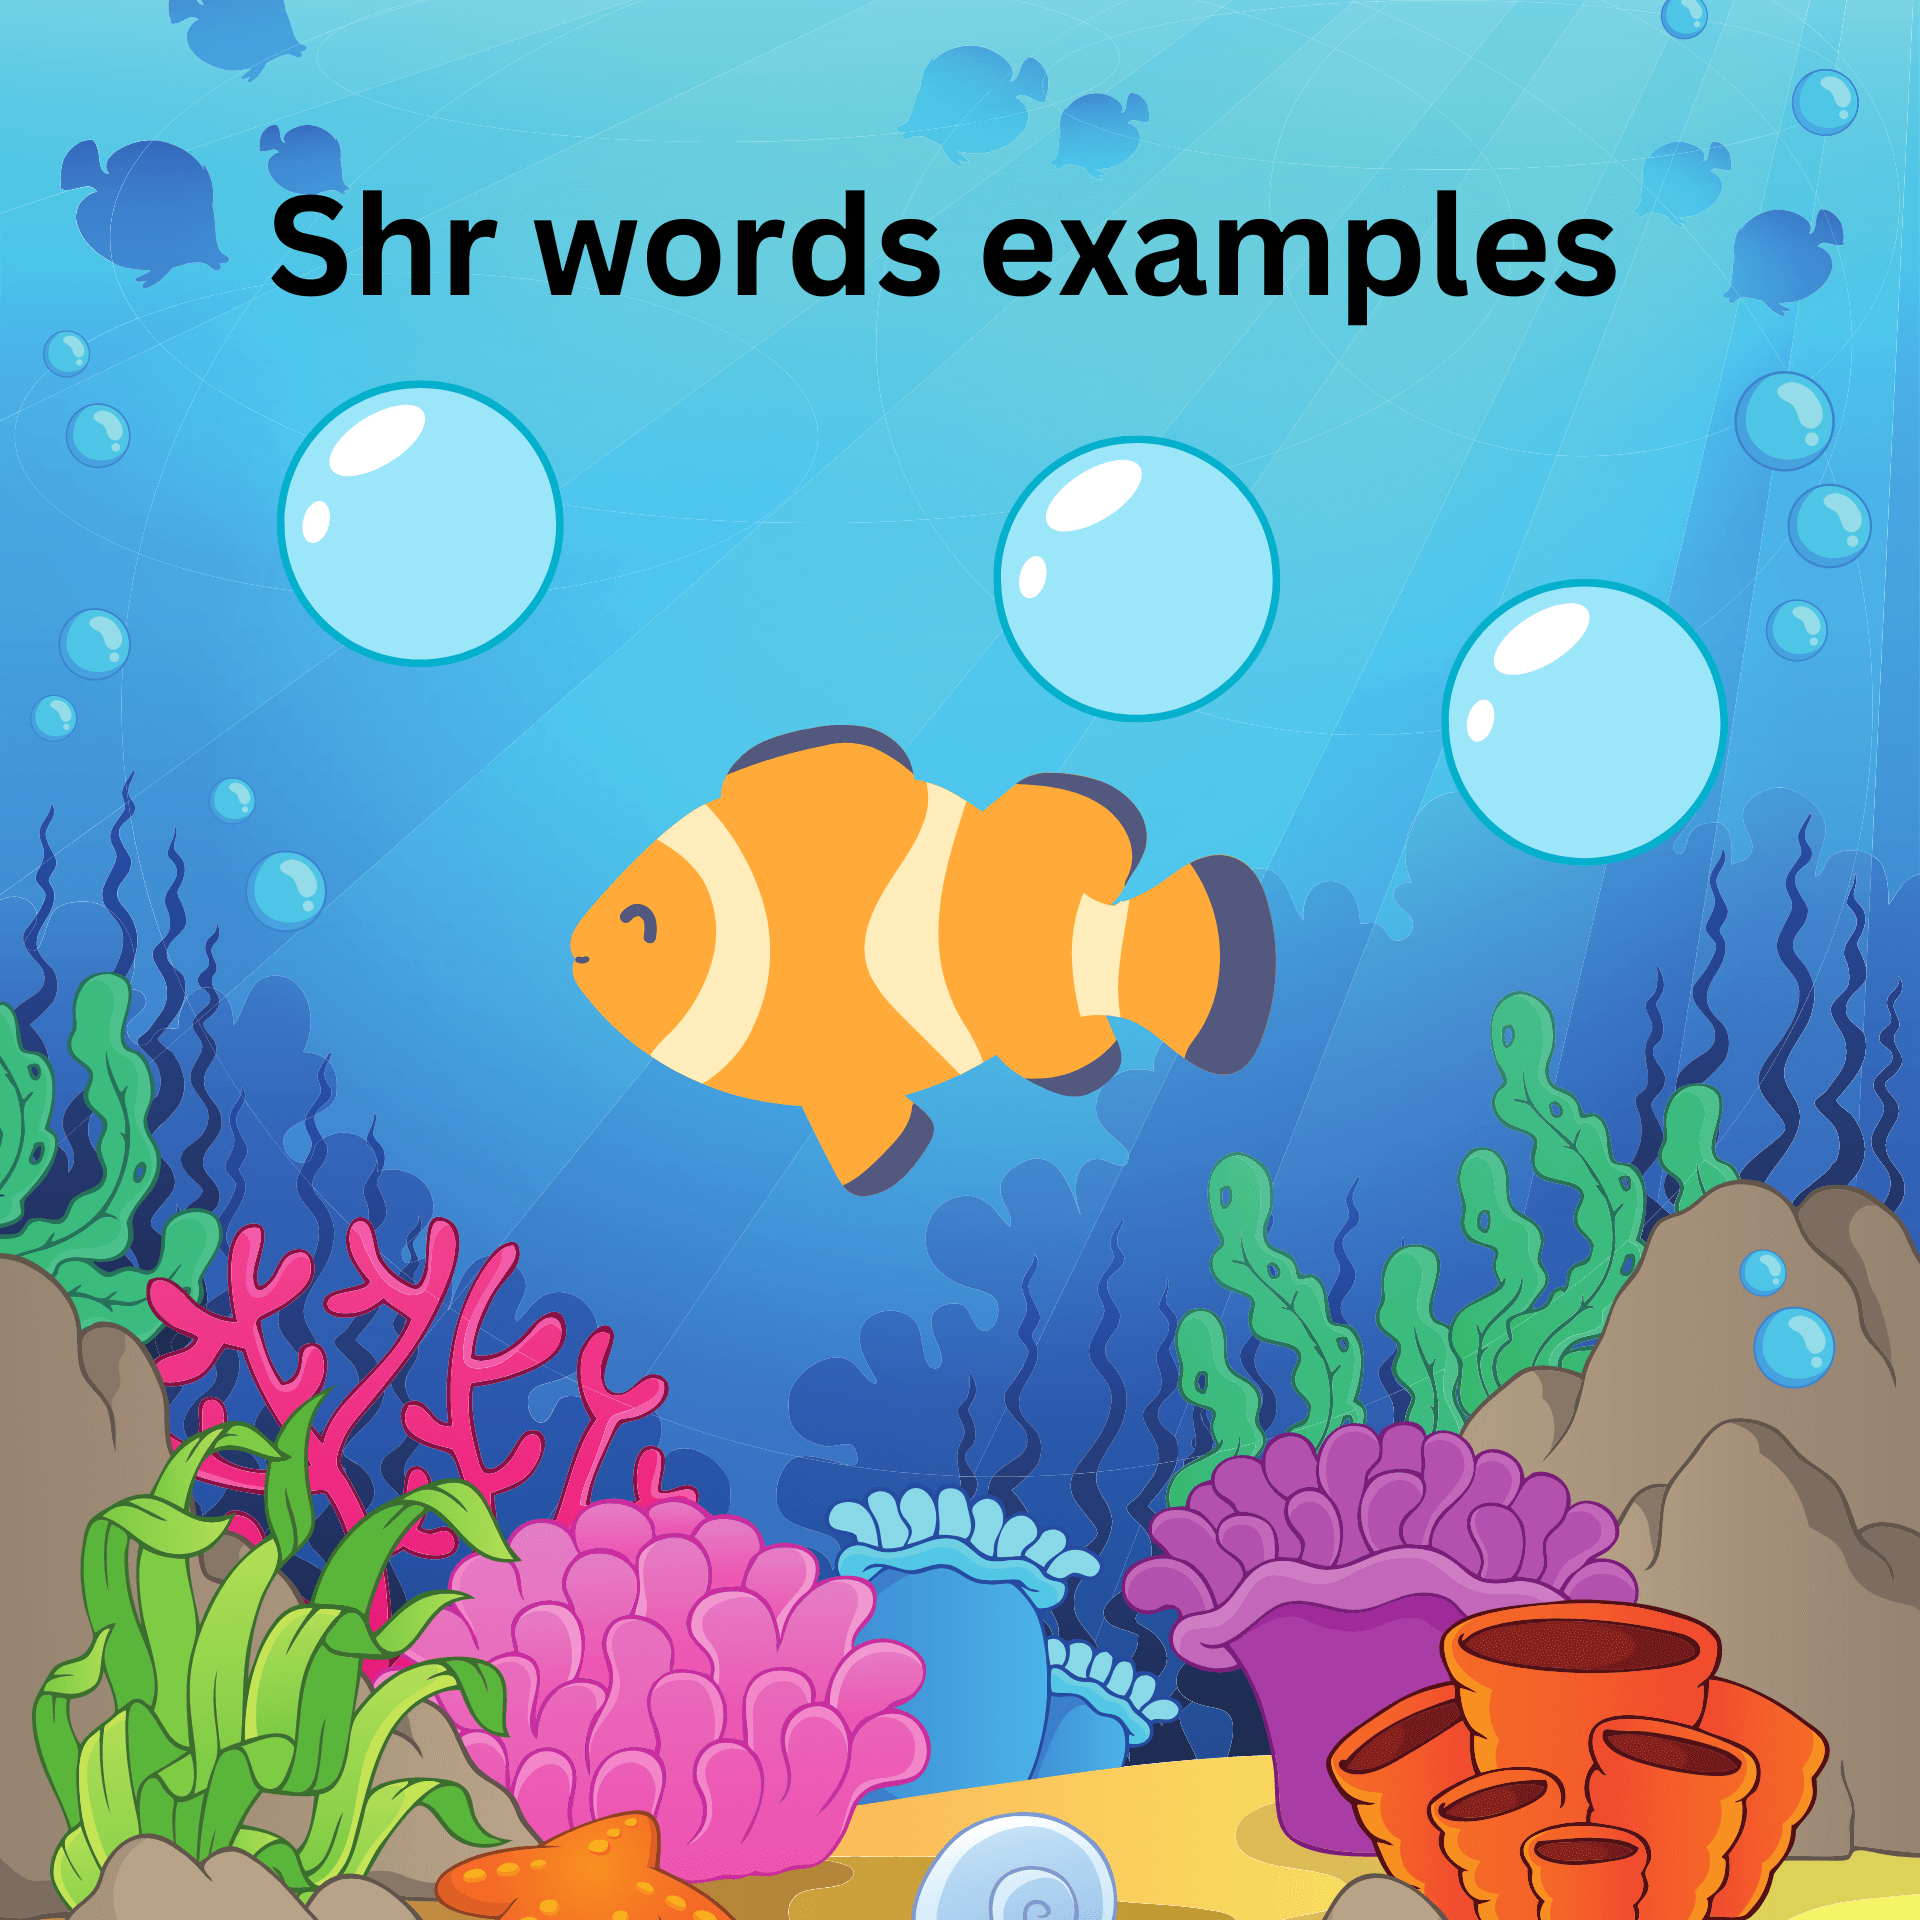 using shr words to know shr words examples